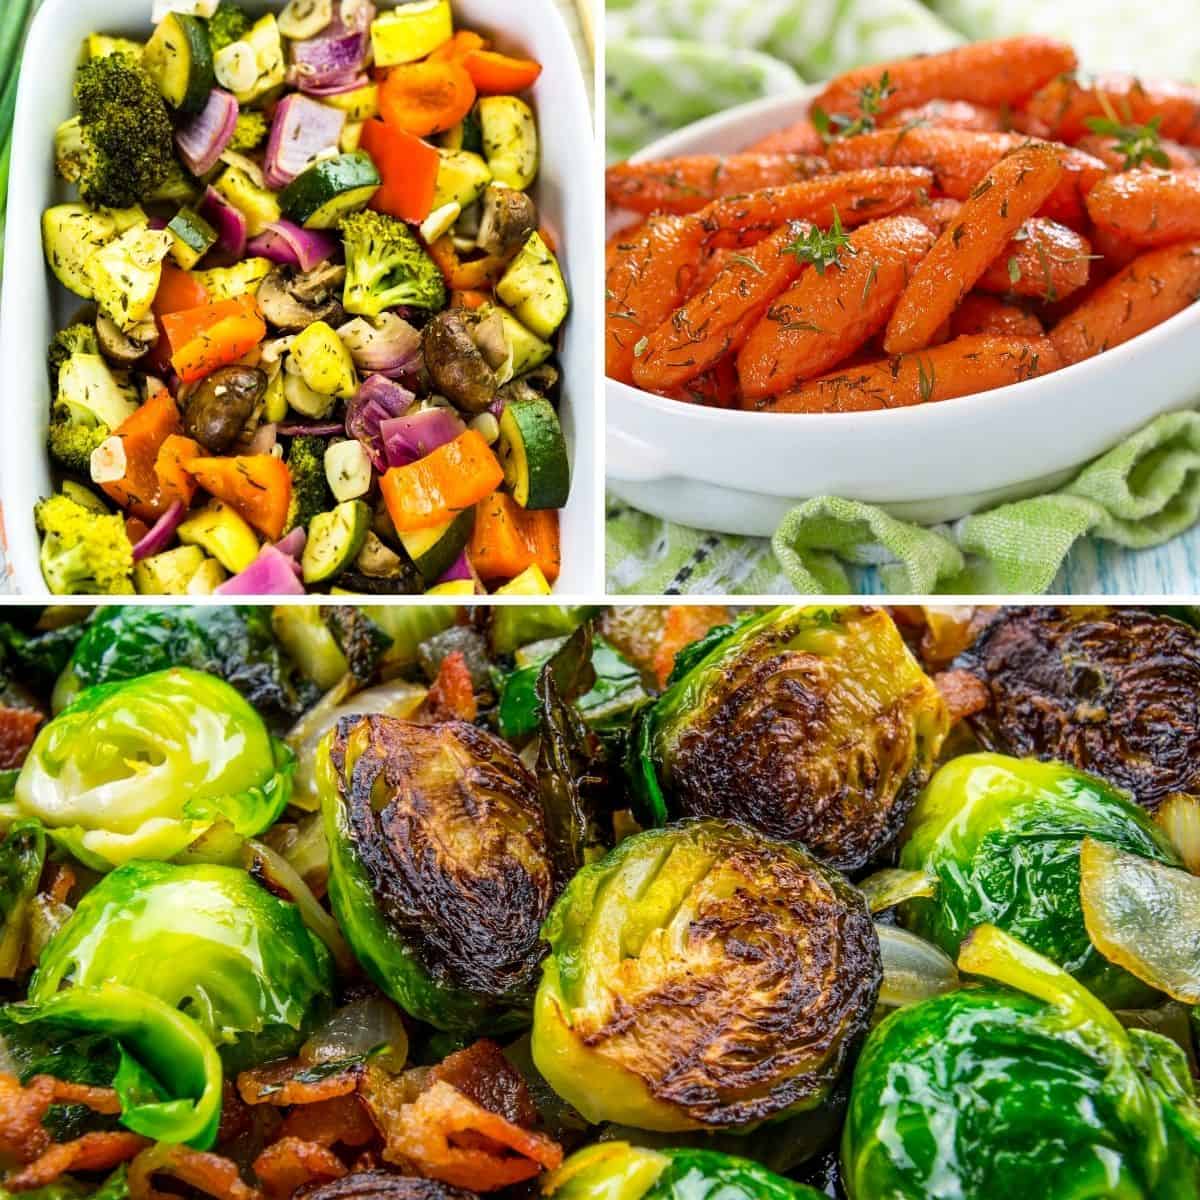 roasted veggies such as cheesy brussel sprouts, glazed carrots and roasted veggies in a collage form to serve for thanksgiving